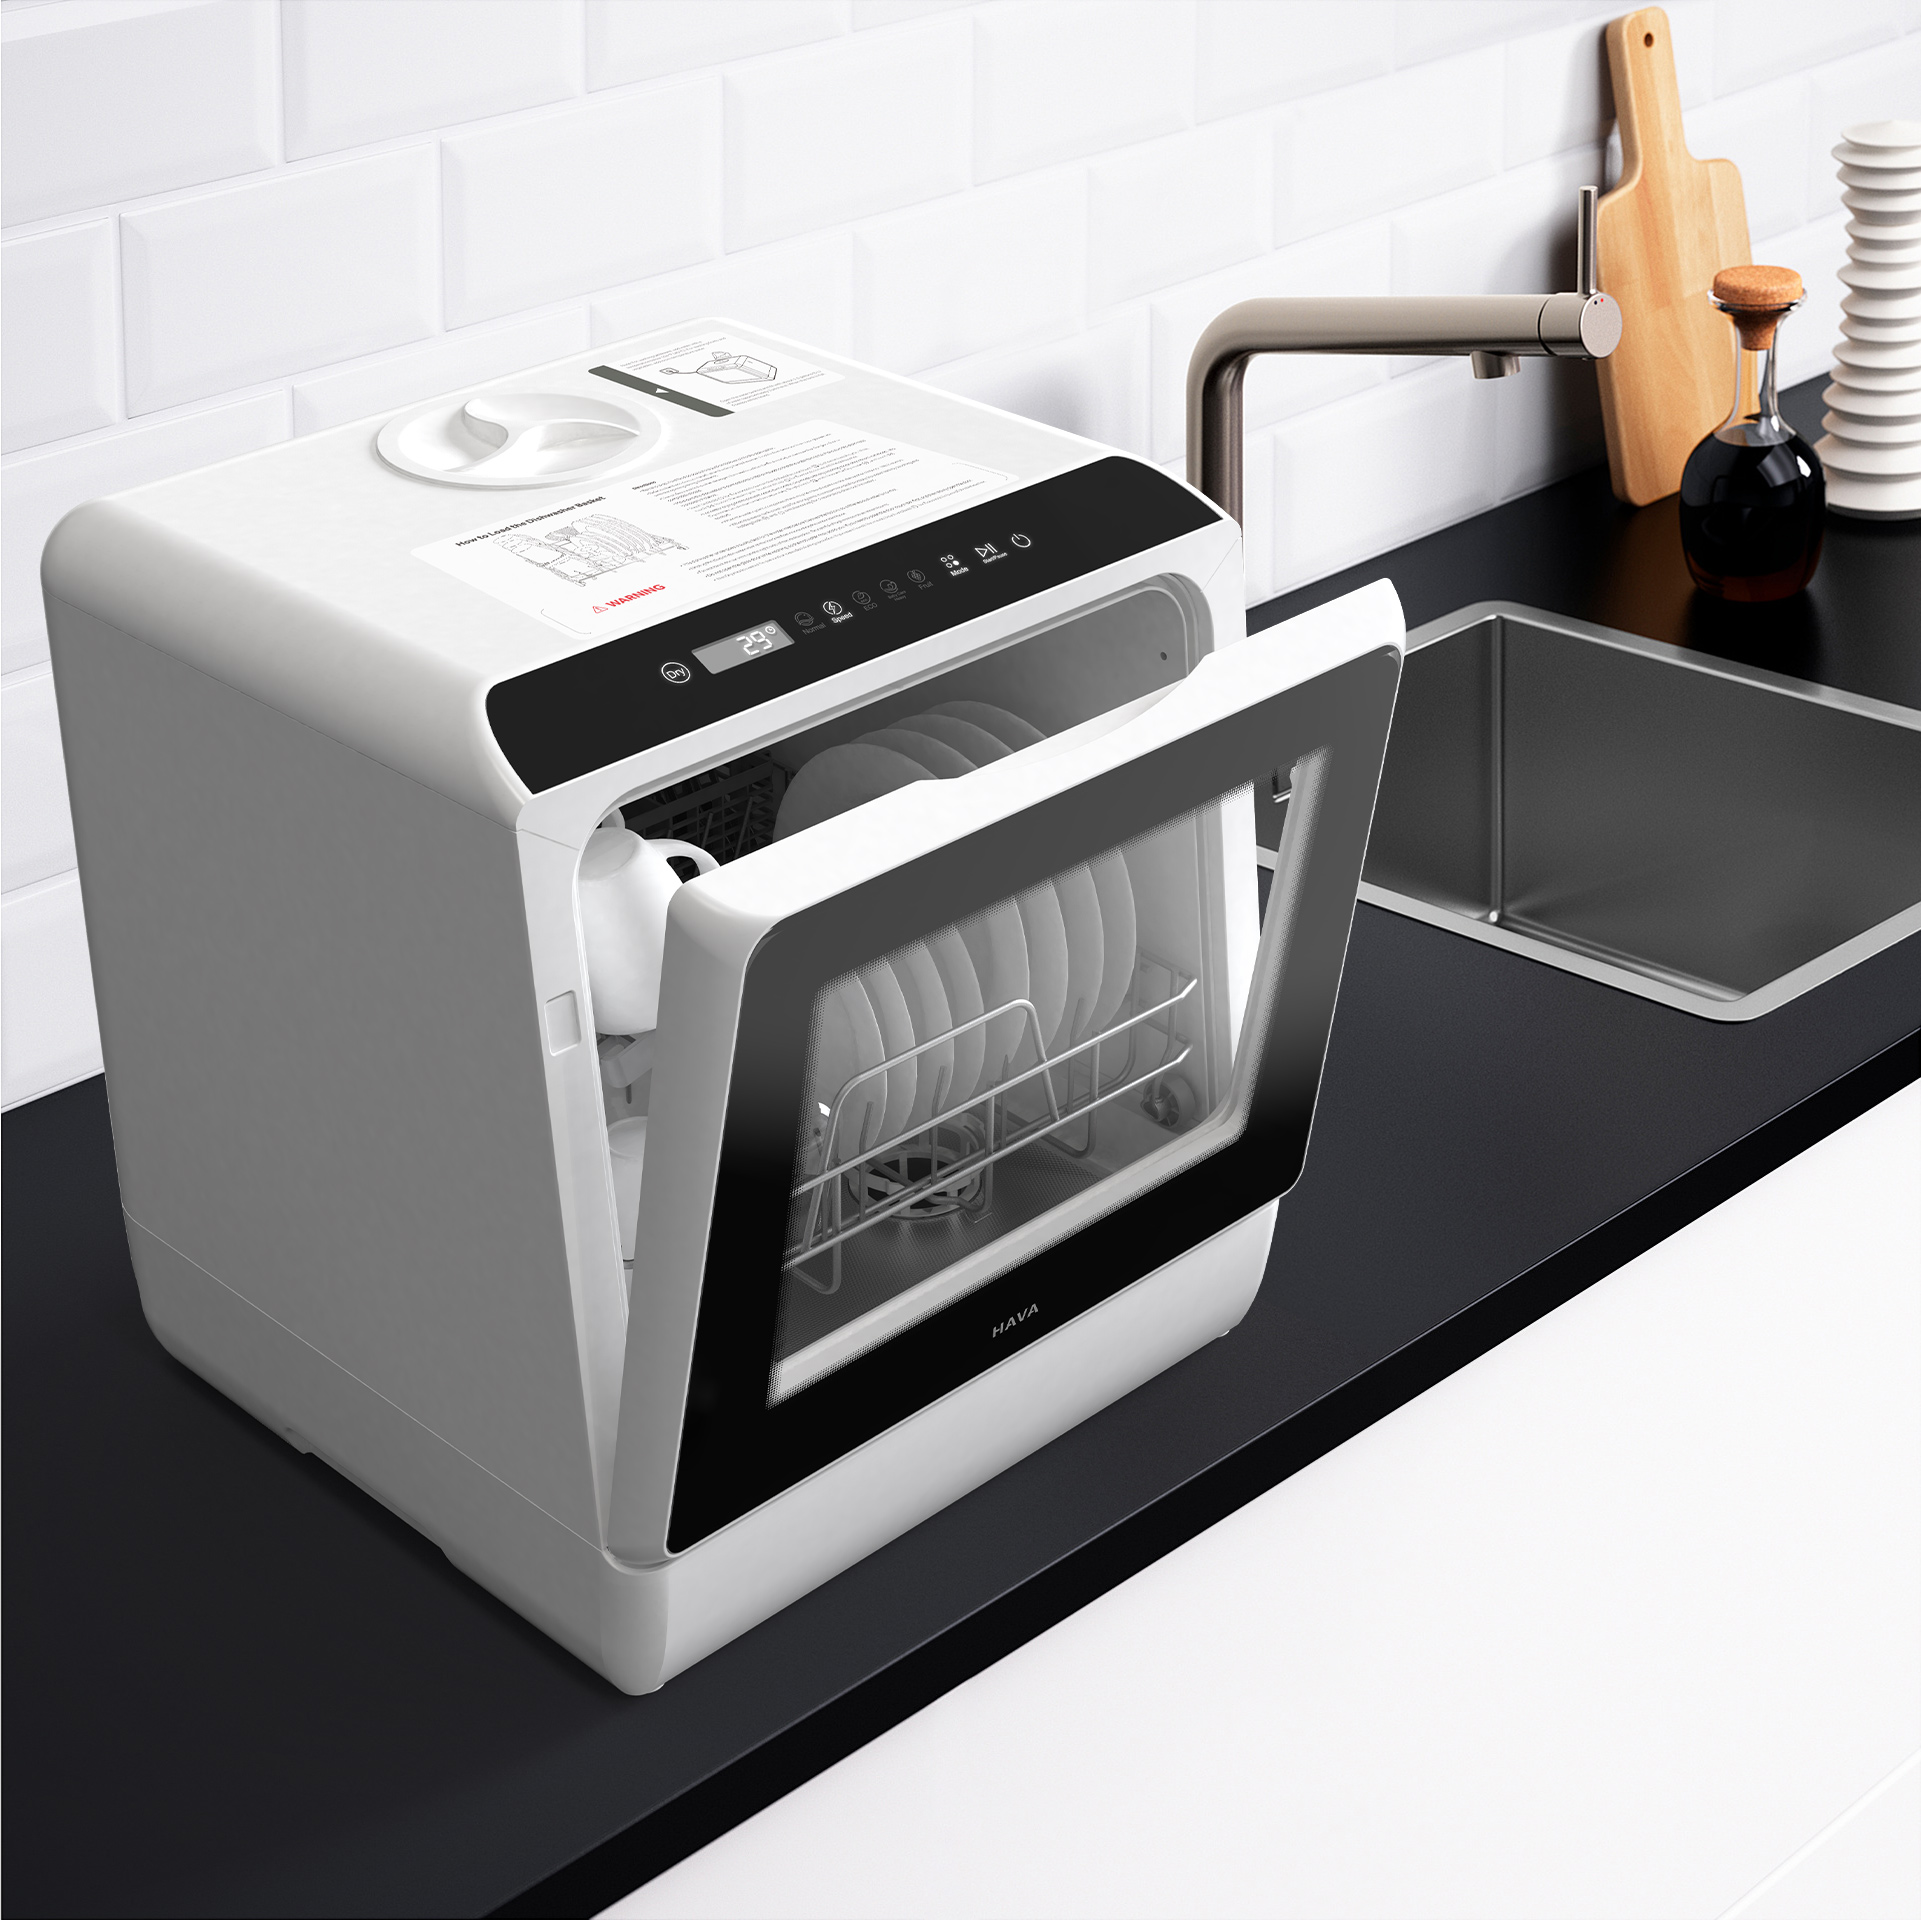 Wholesale NOVETE TDQR01 Compact Countertop Dishwasher with 1.3